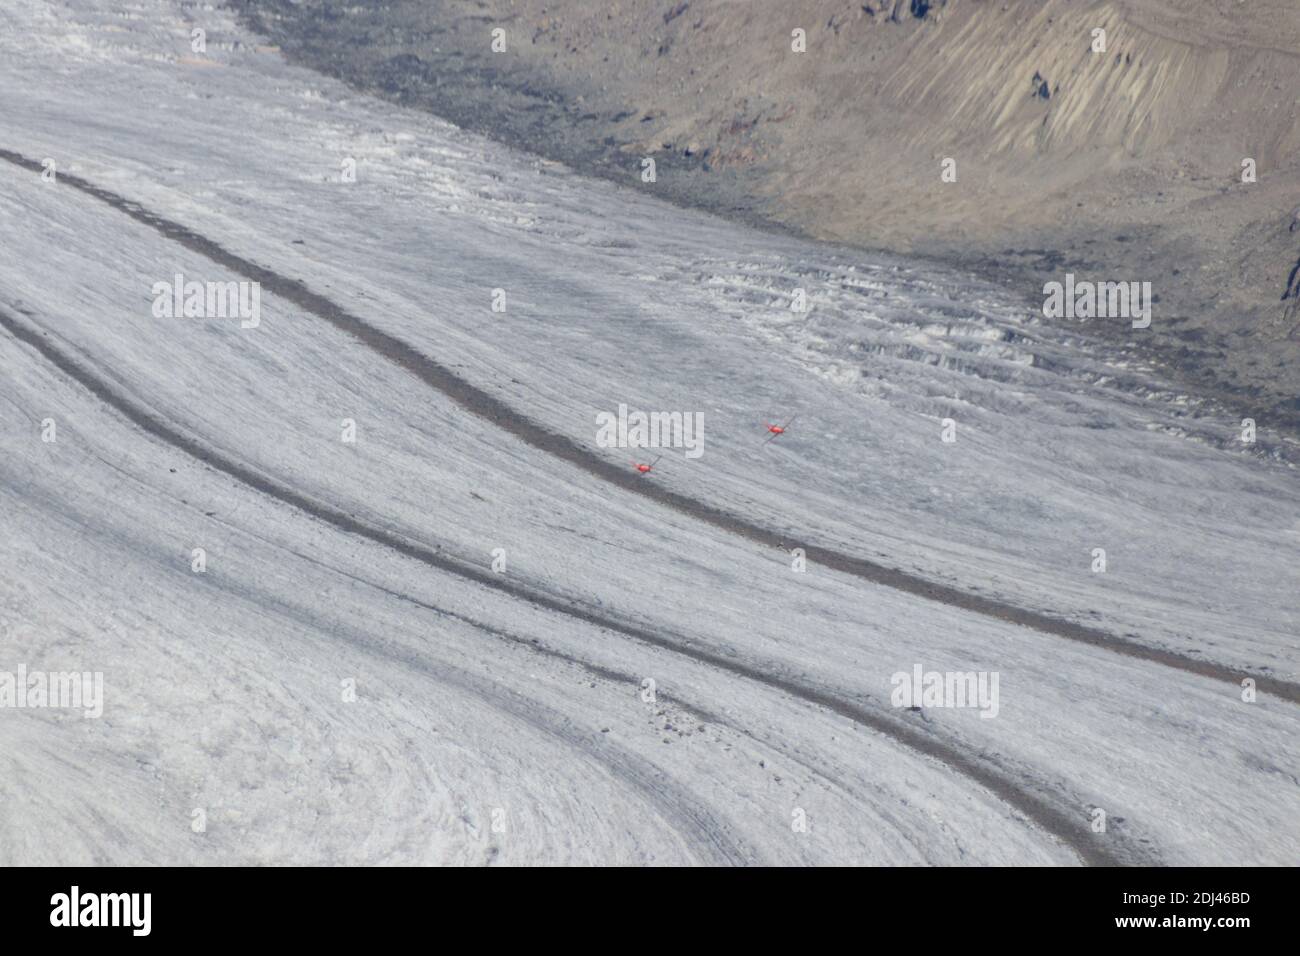 two airplanes fly above the aletsch glacier in Switzerland Stock Photo